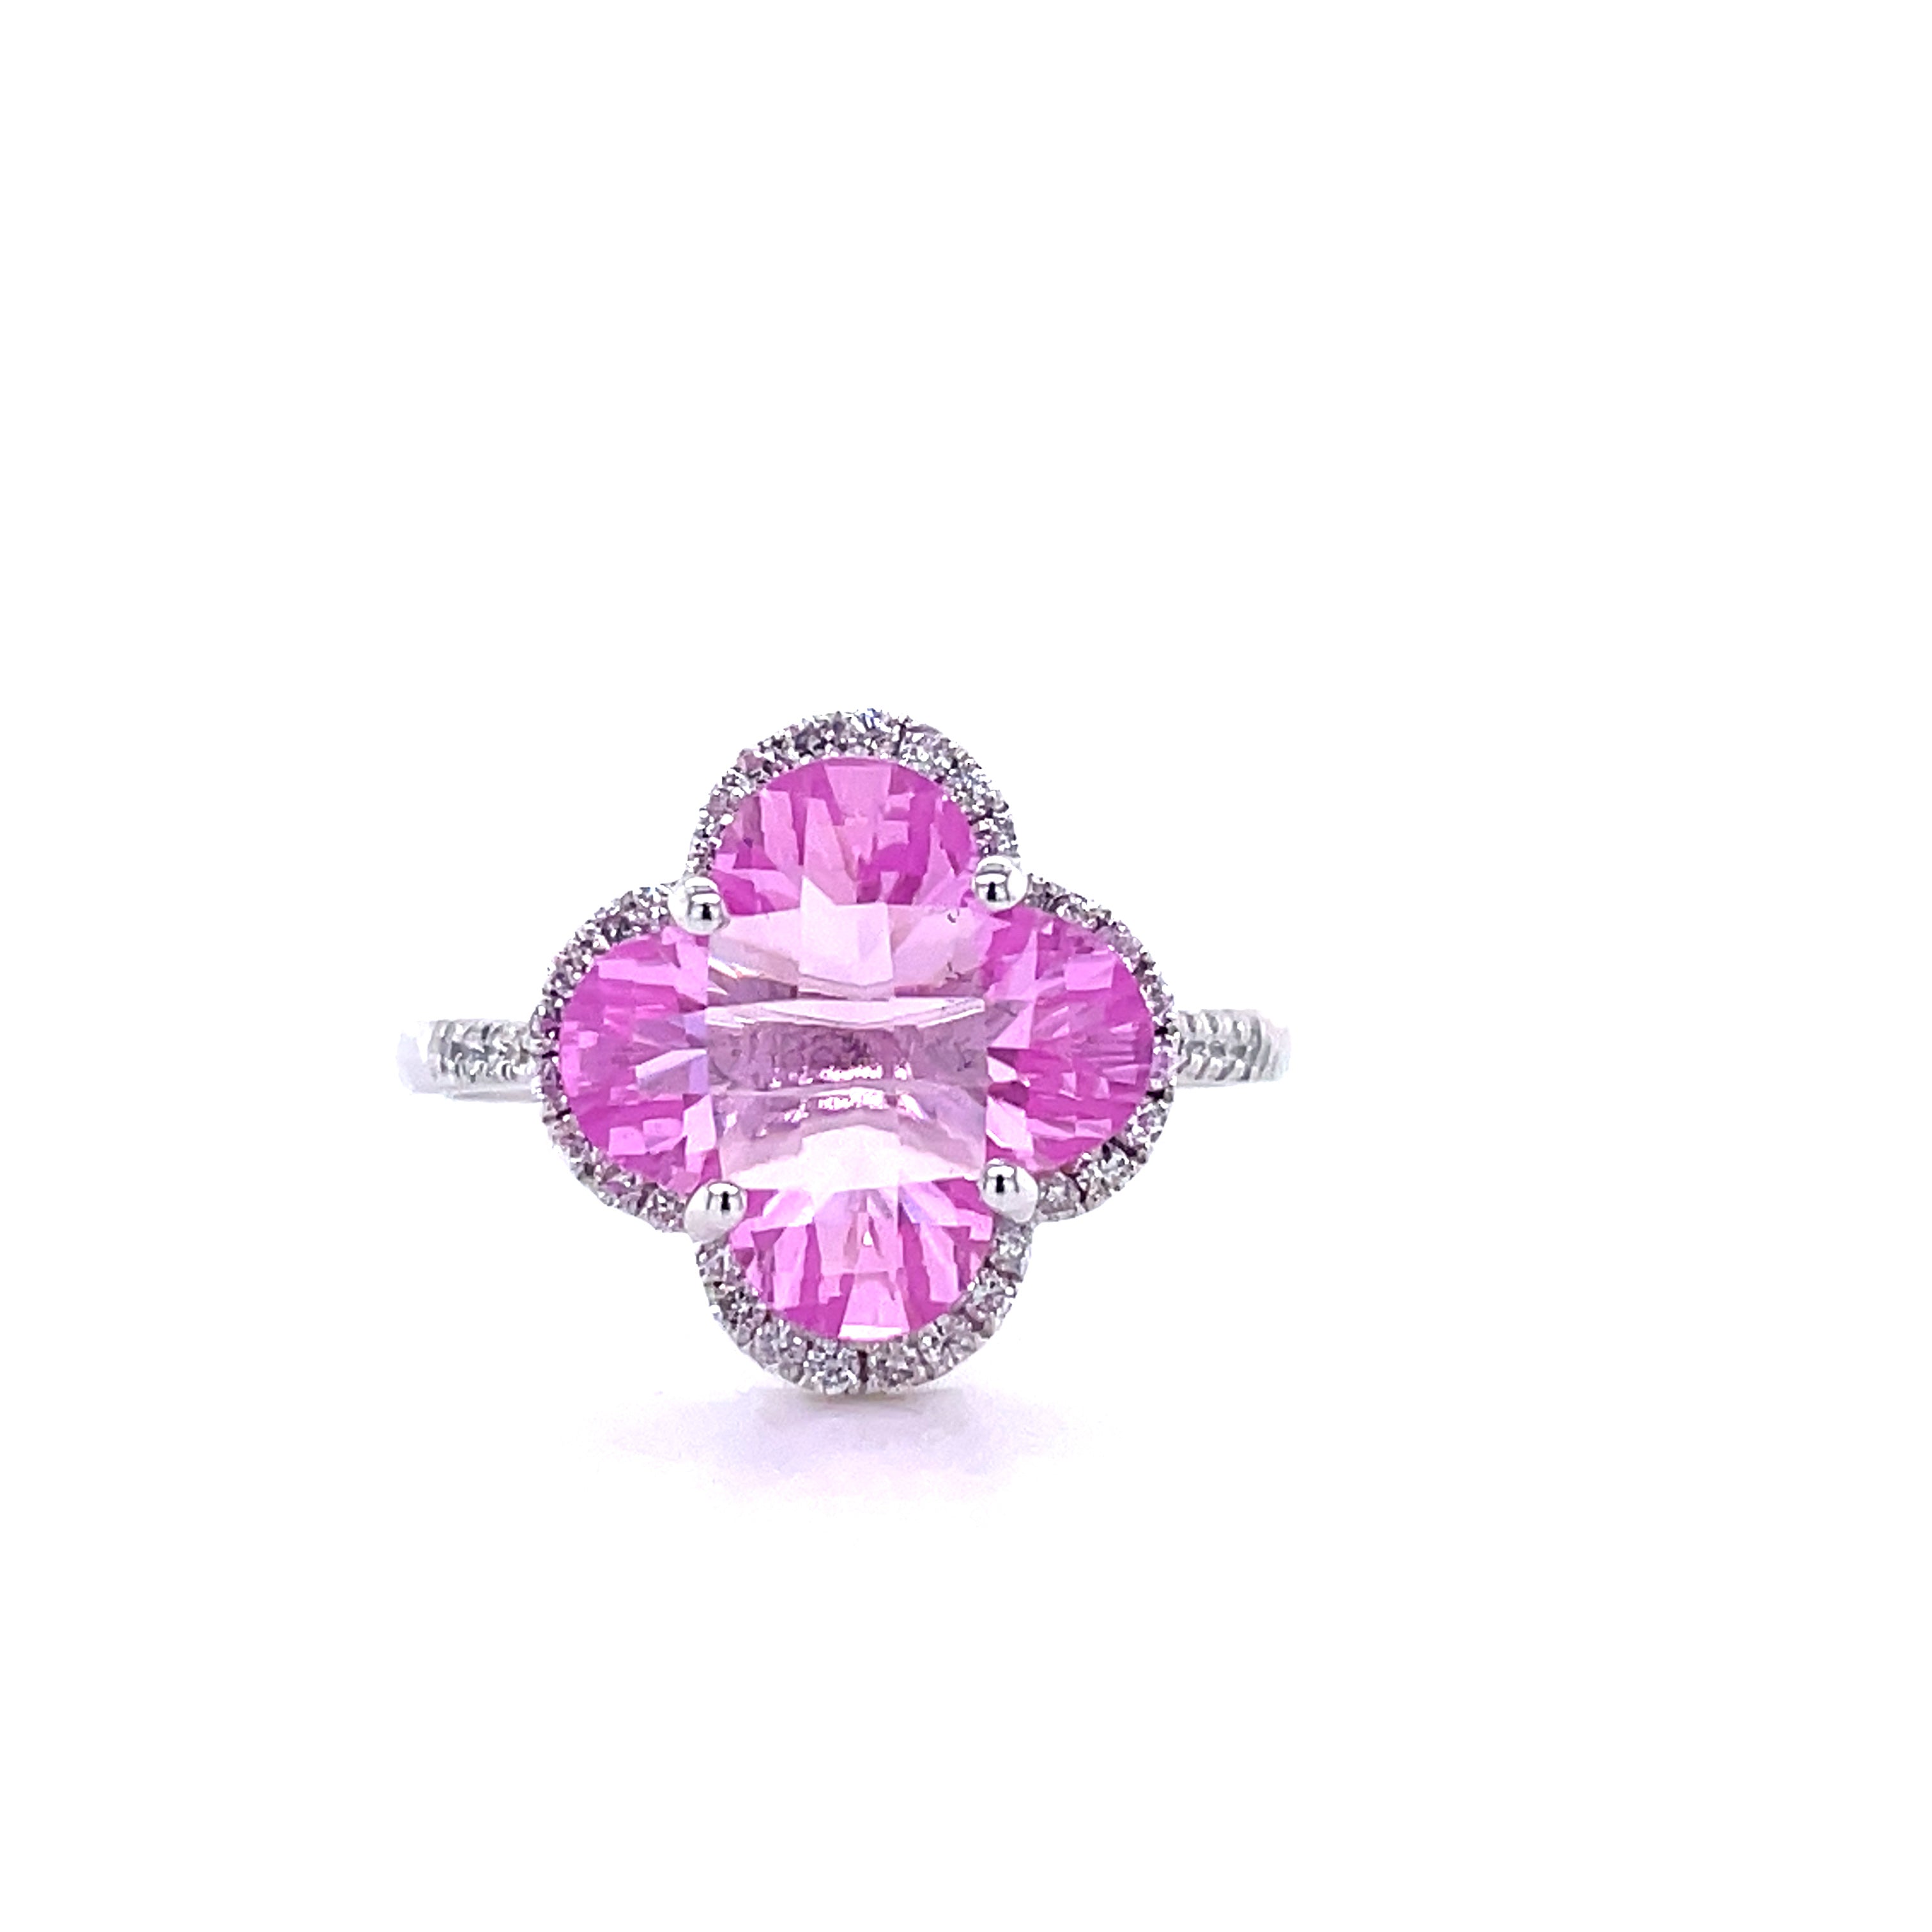 18k yellow gold  Surrounded by white round diamonds 0.28 cts   Flower shape pink topaz 2.69 cts  6.5 size (sizeable)  12.00 mm width 